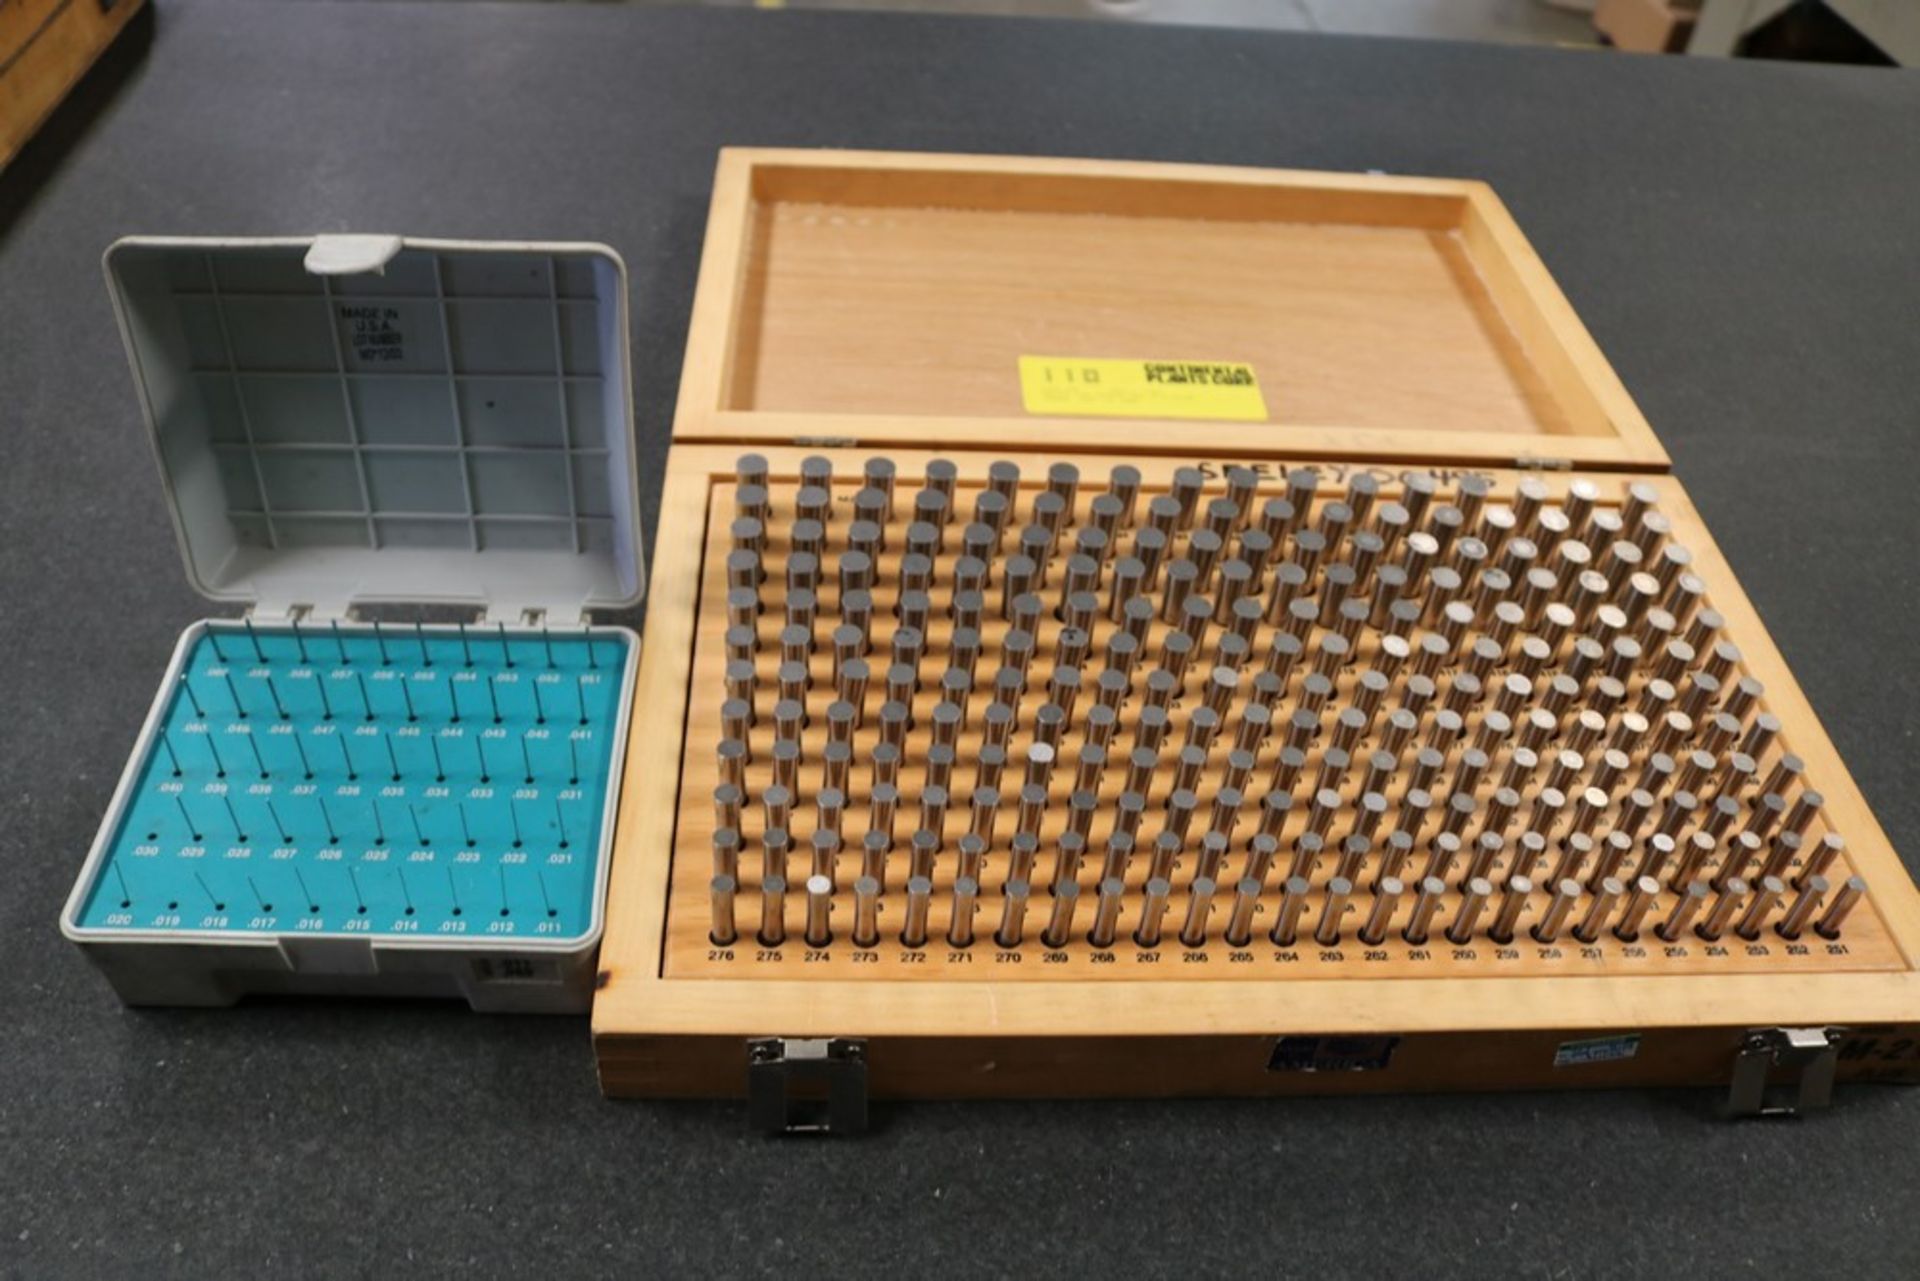 Meyer Pin Gage Set Complete .251 - .500" and Meyer Pin Gage Set .011 - .060" - Image 2 of 3